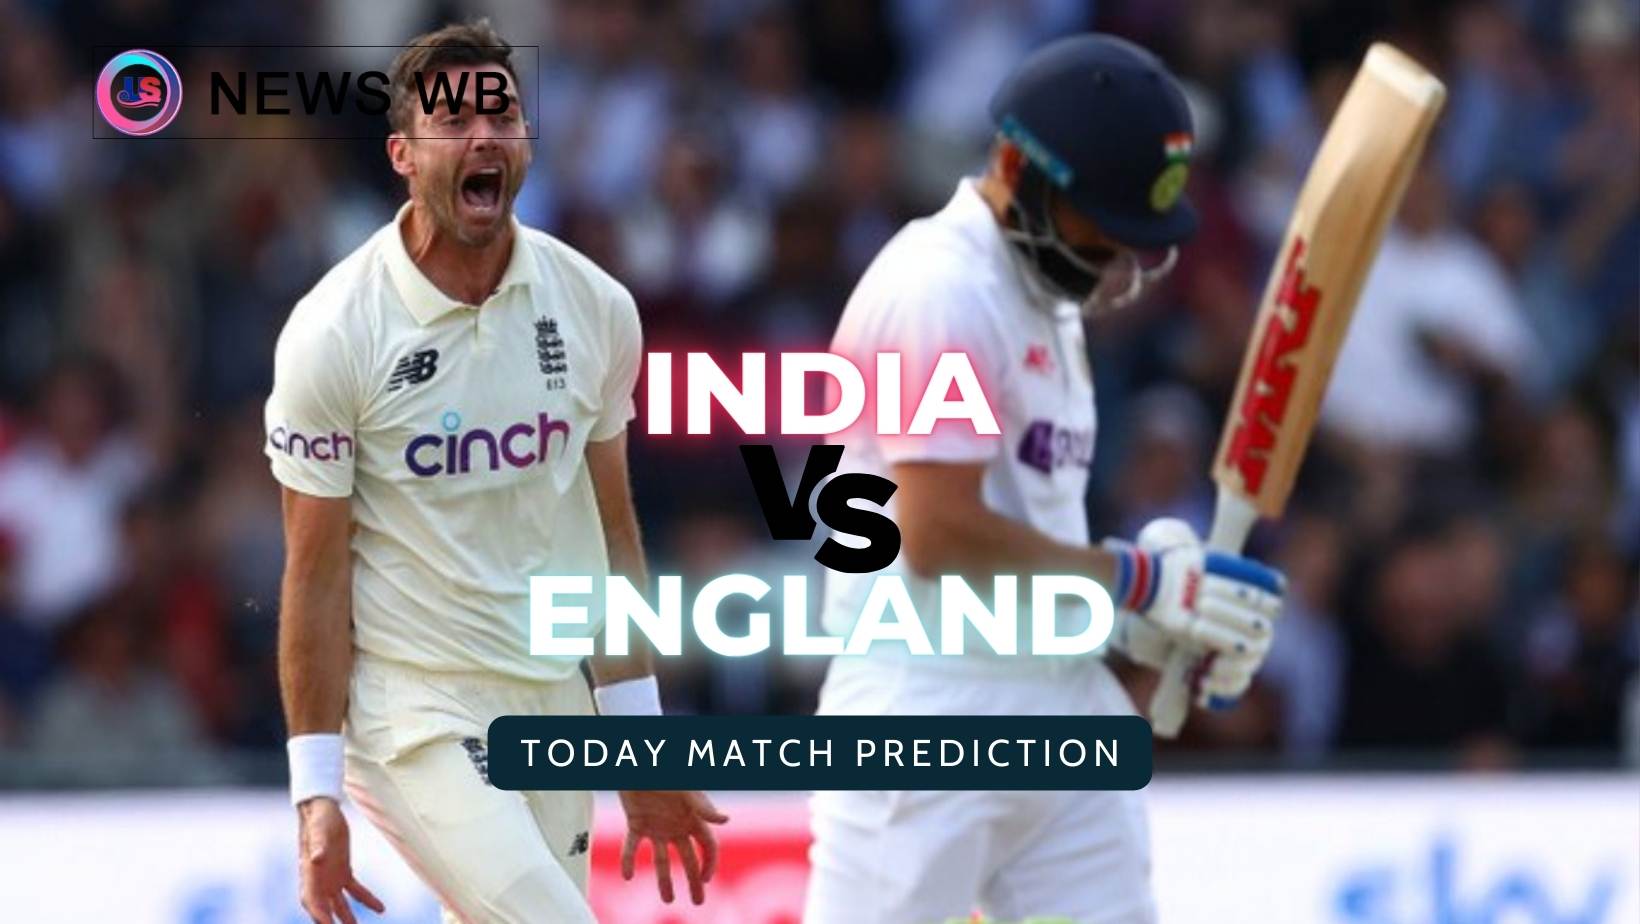 Today Match Prediction: IND vs ENG Dream11 Team, India vs England 1st Test Match, Who Will Win?